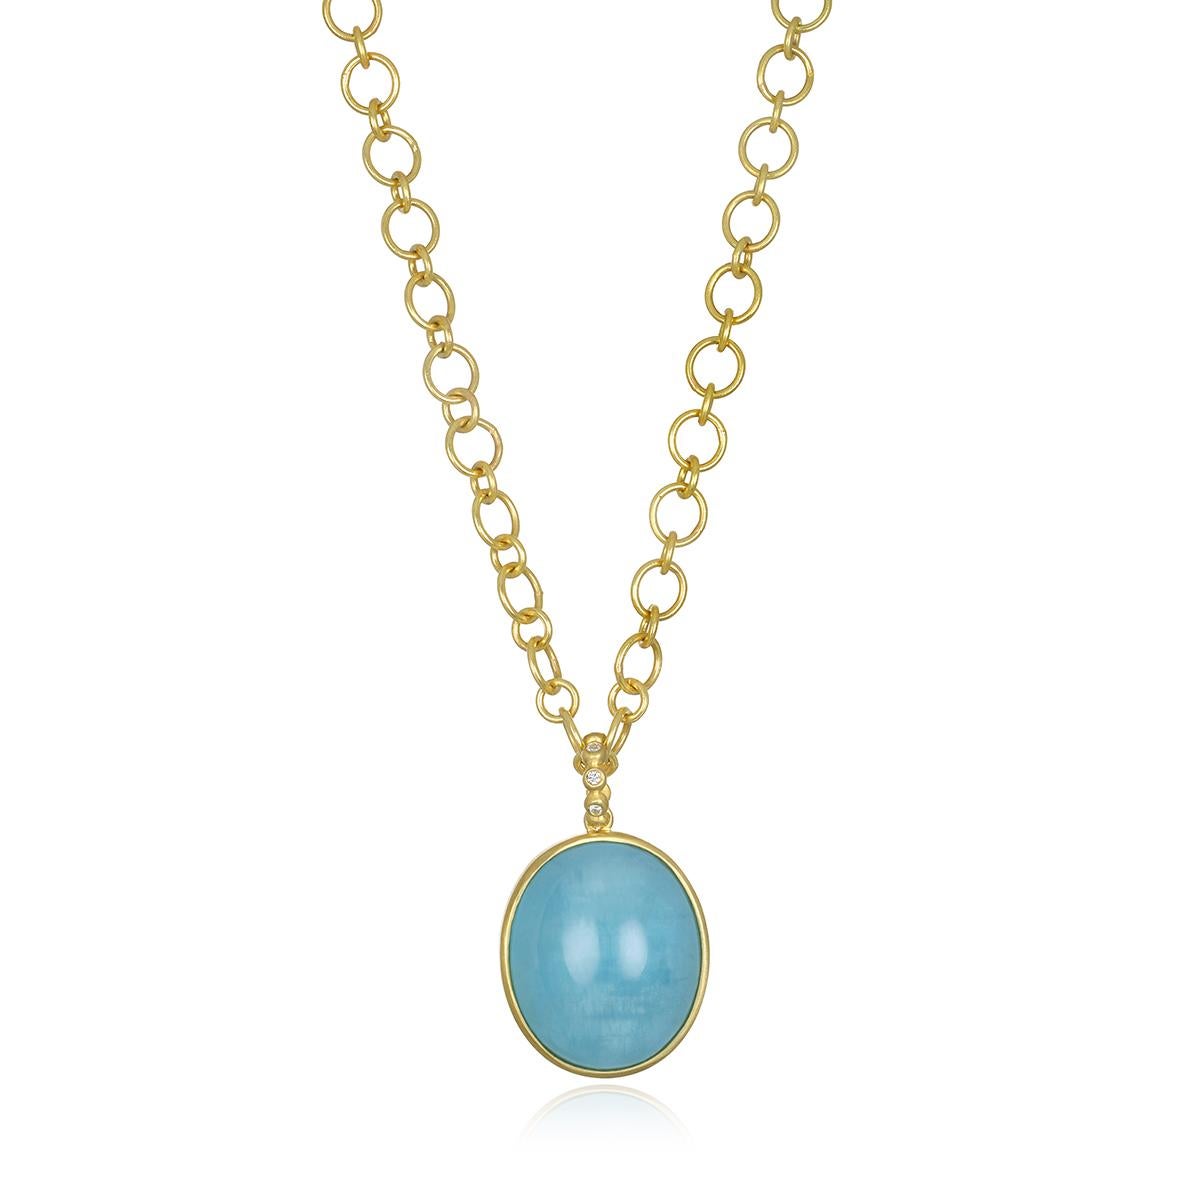 Faye's 47.3-carat milky Aquamarine oval cabochon pendant is a true One-of-a-Kind piece handcrafted and bezel set in 18K gold.  The soft, ethereal blue is enhanced by the white diamonds in the bail.  
Pendant Length: 1.5